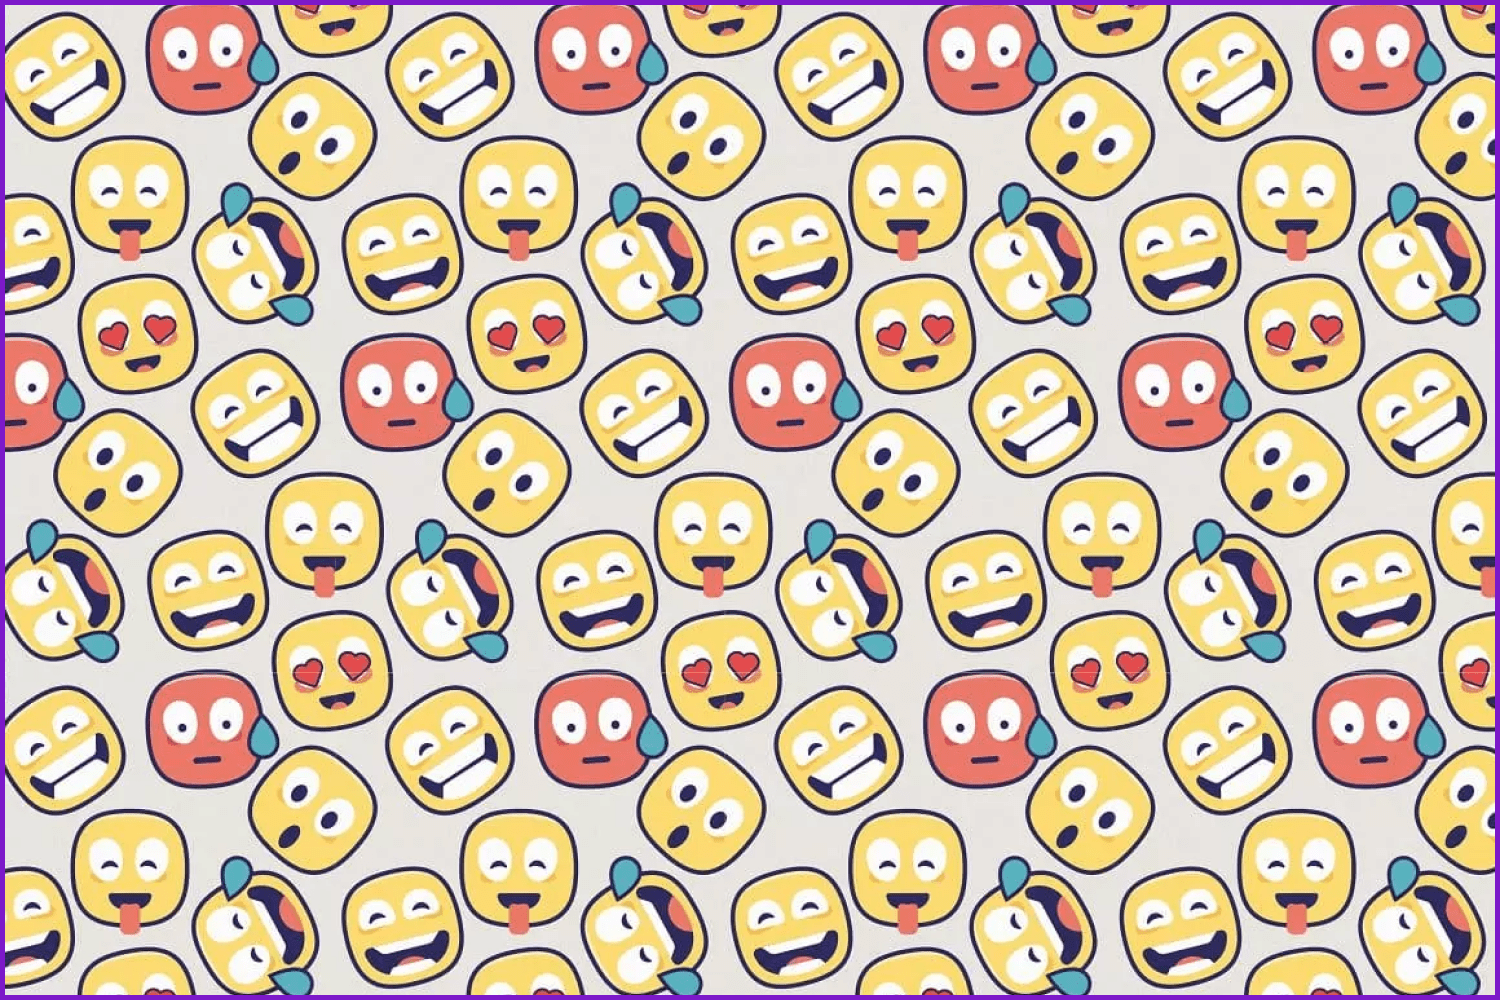 Images of drawn multi-colored square emoticons with different emotions.